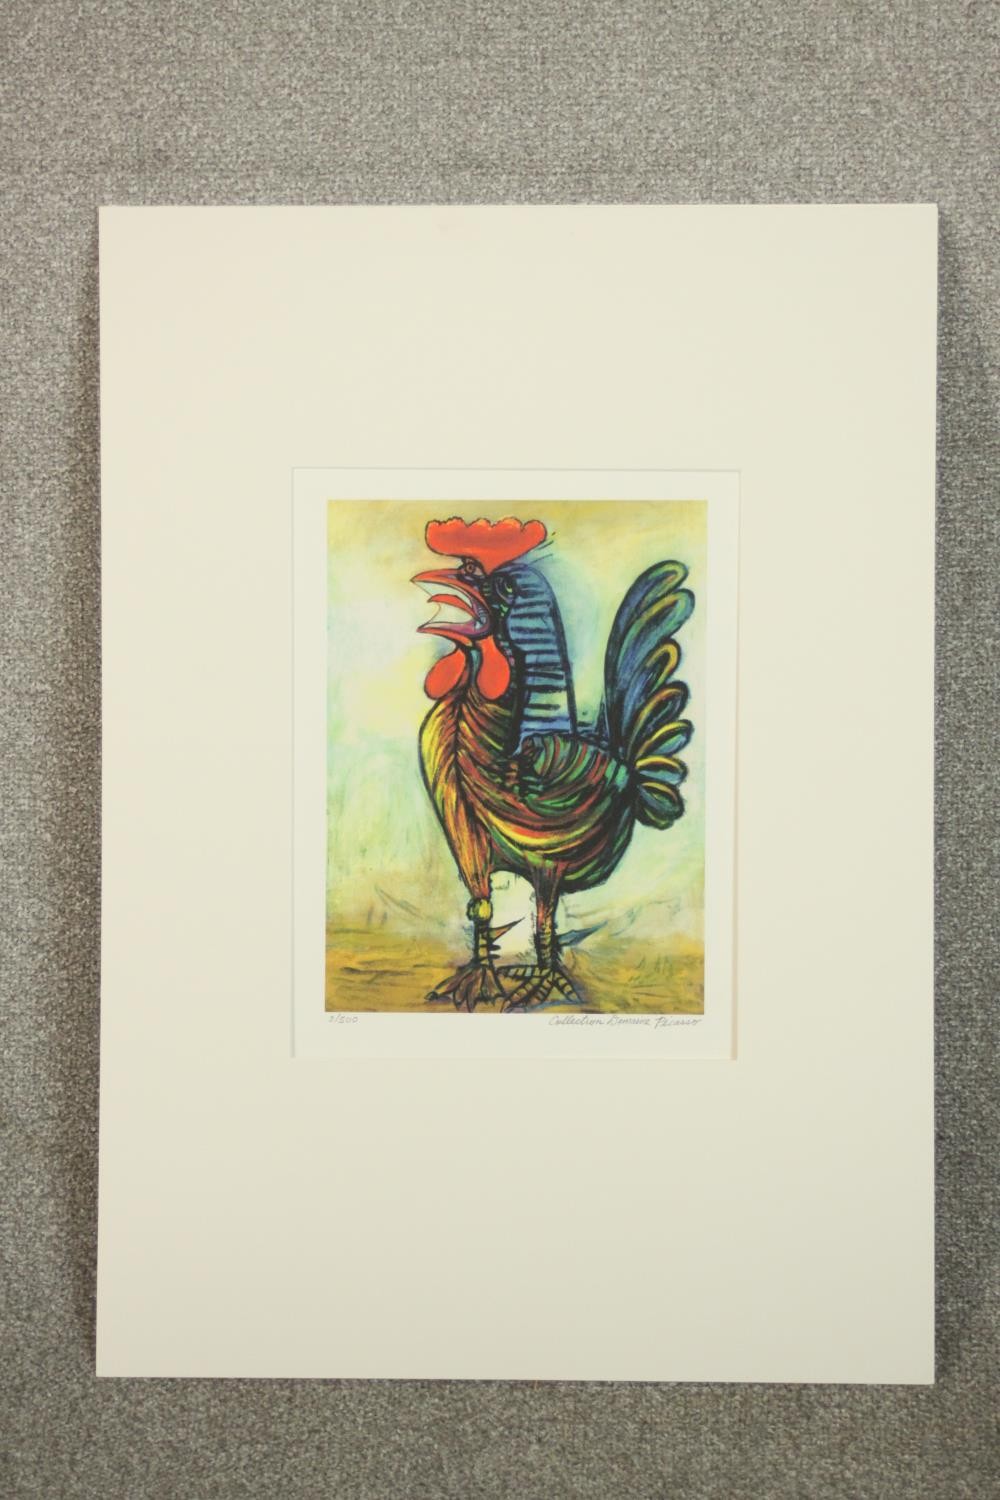 After Pablo Picasso, Cock (Coq), (1938), giclée print on archival paper, edition 2/500. H.70 W.50cm. - Image 2 of 7